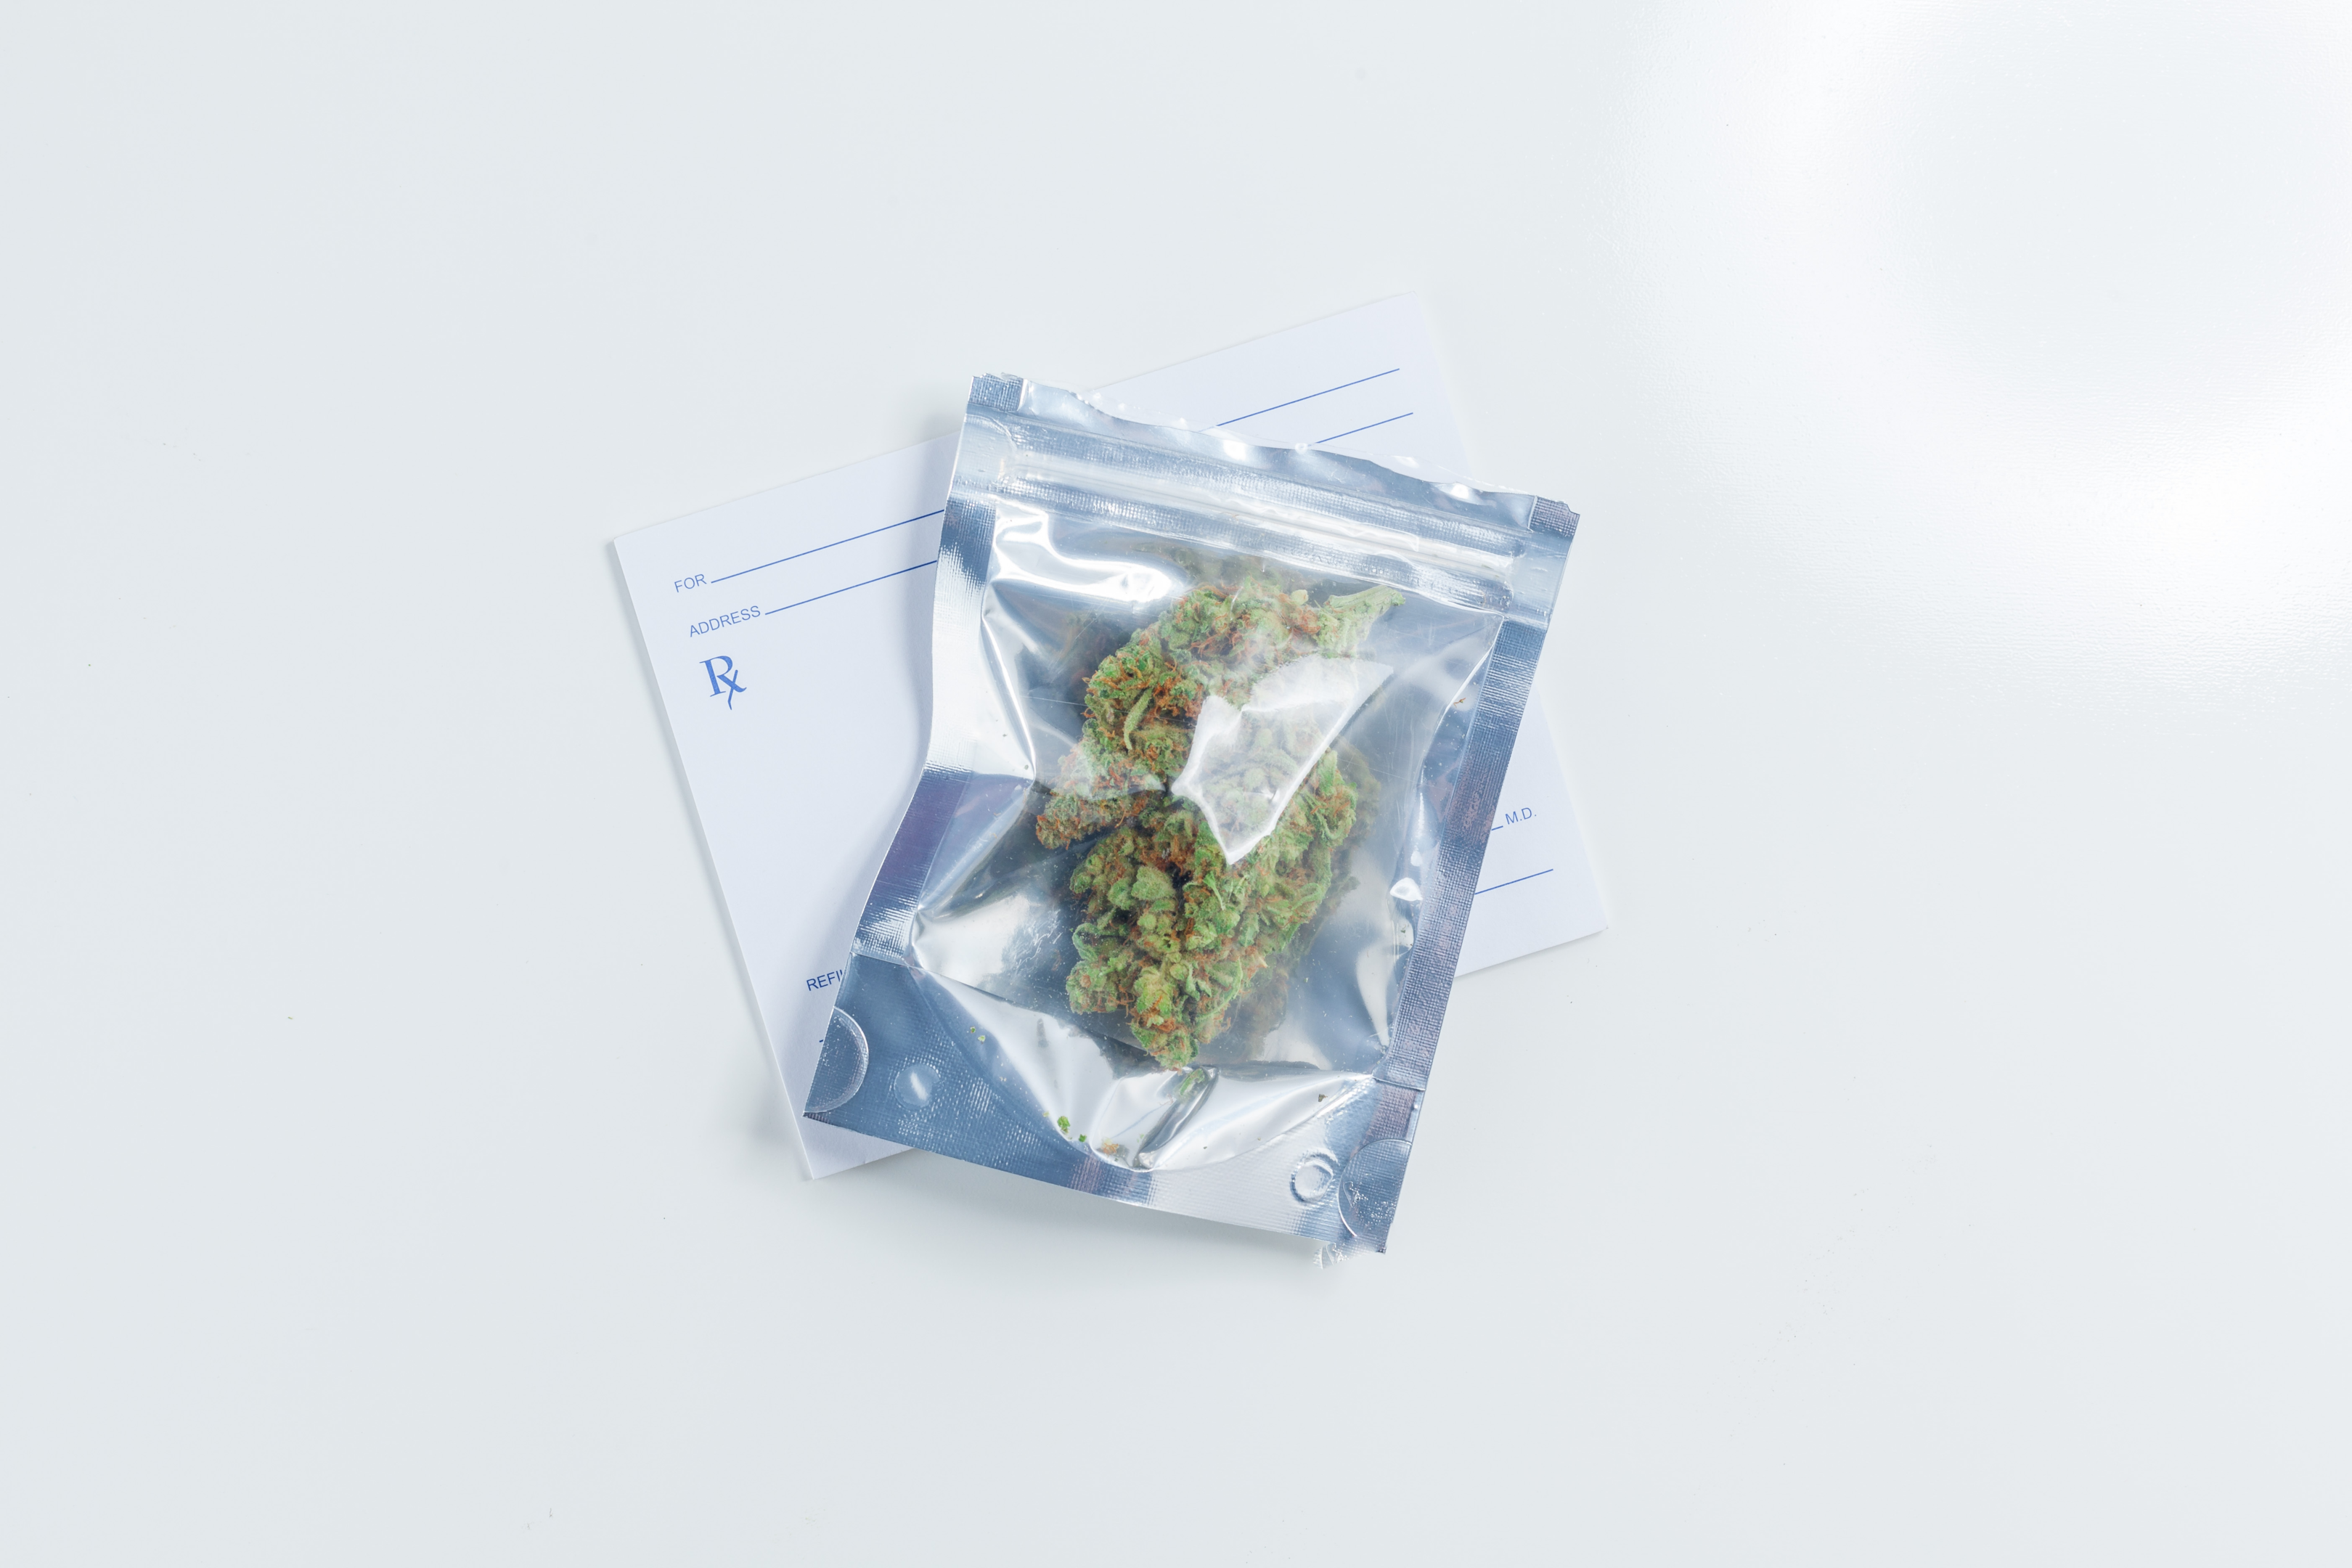 a dub bag of weed, dub sack of weed, cannabis plant buds